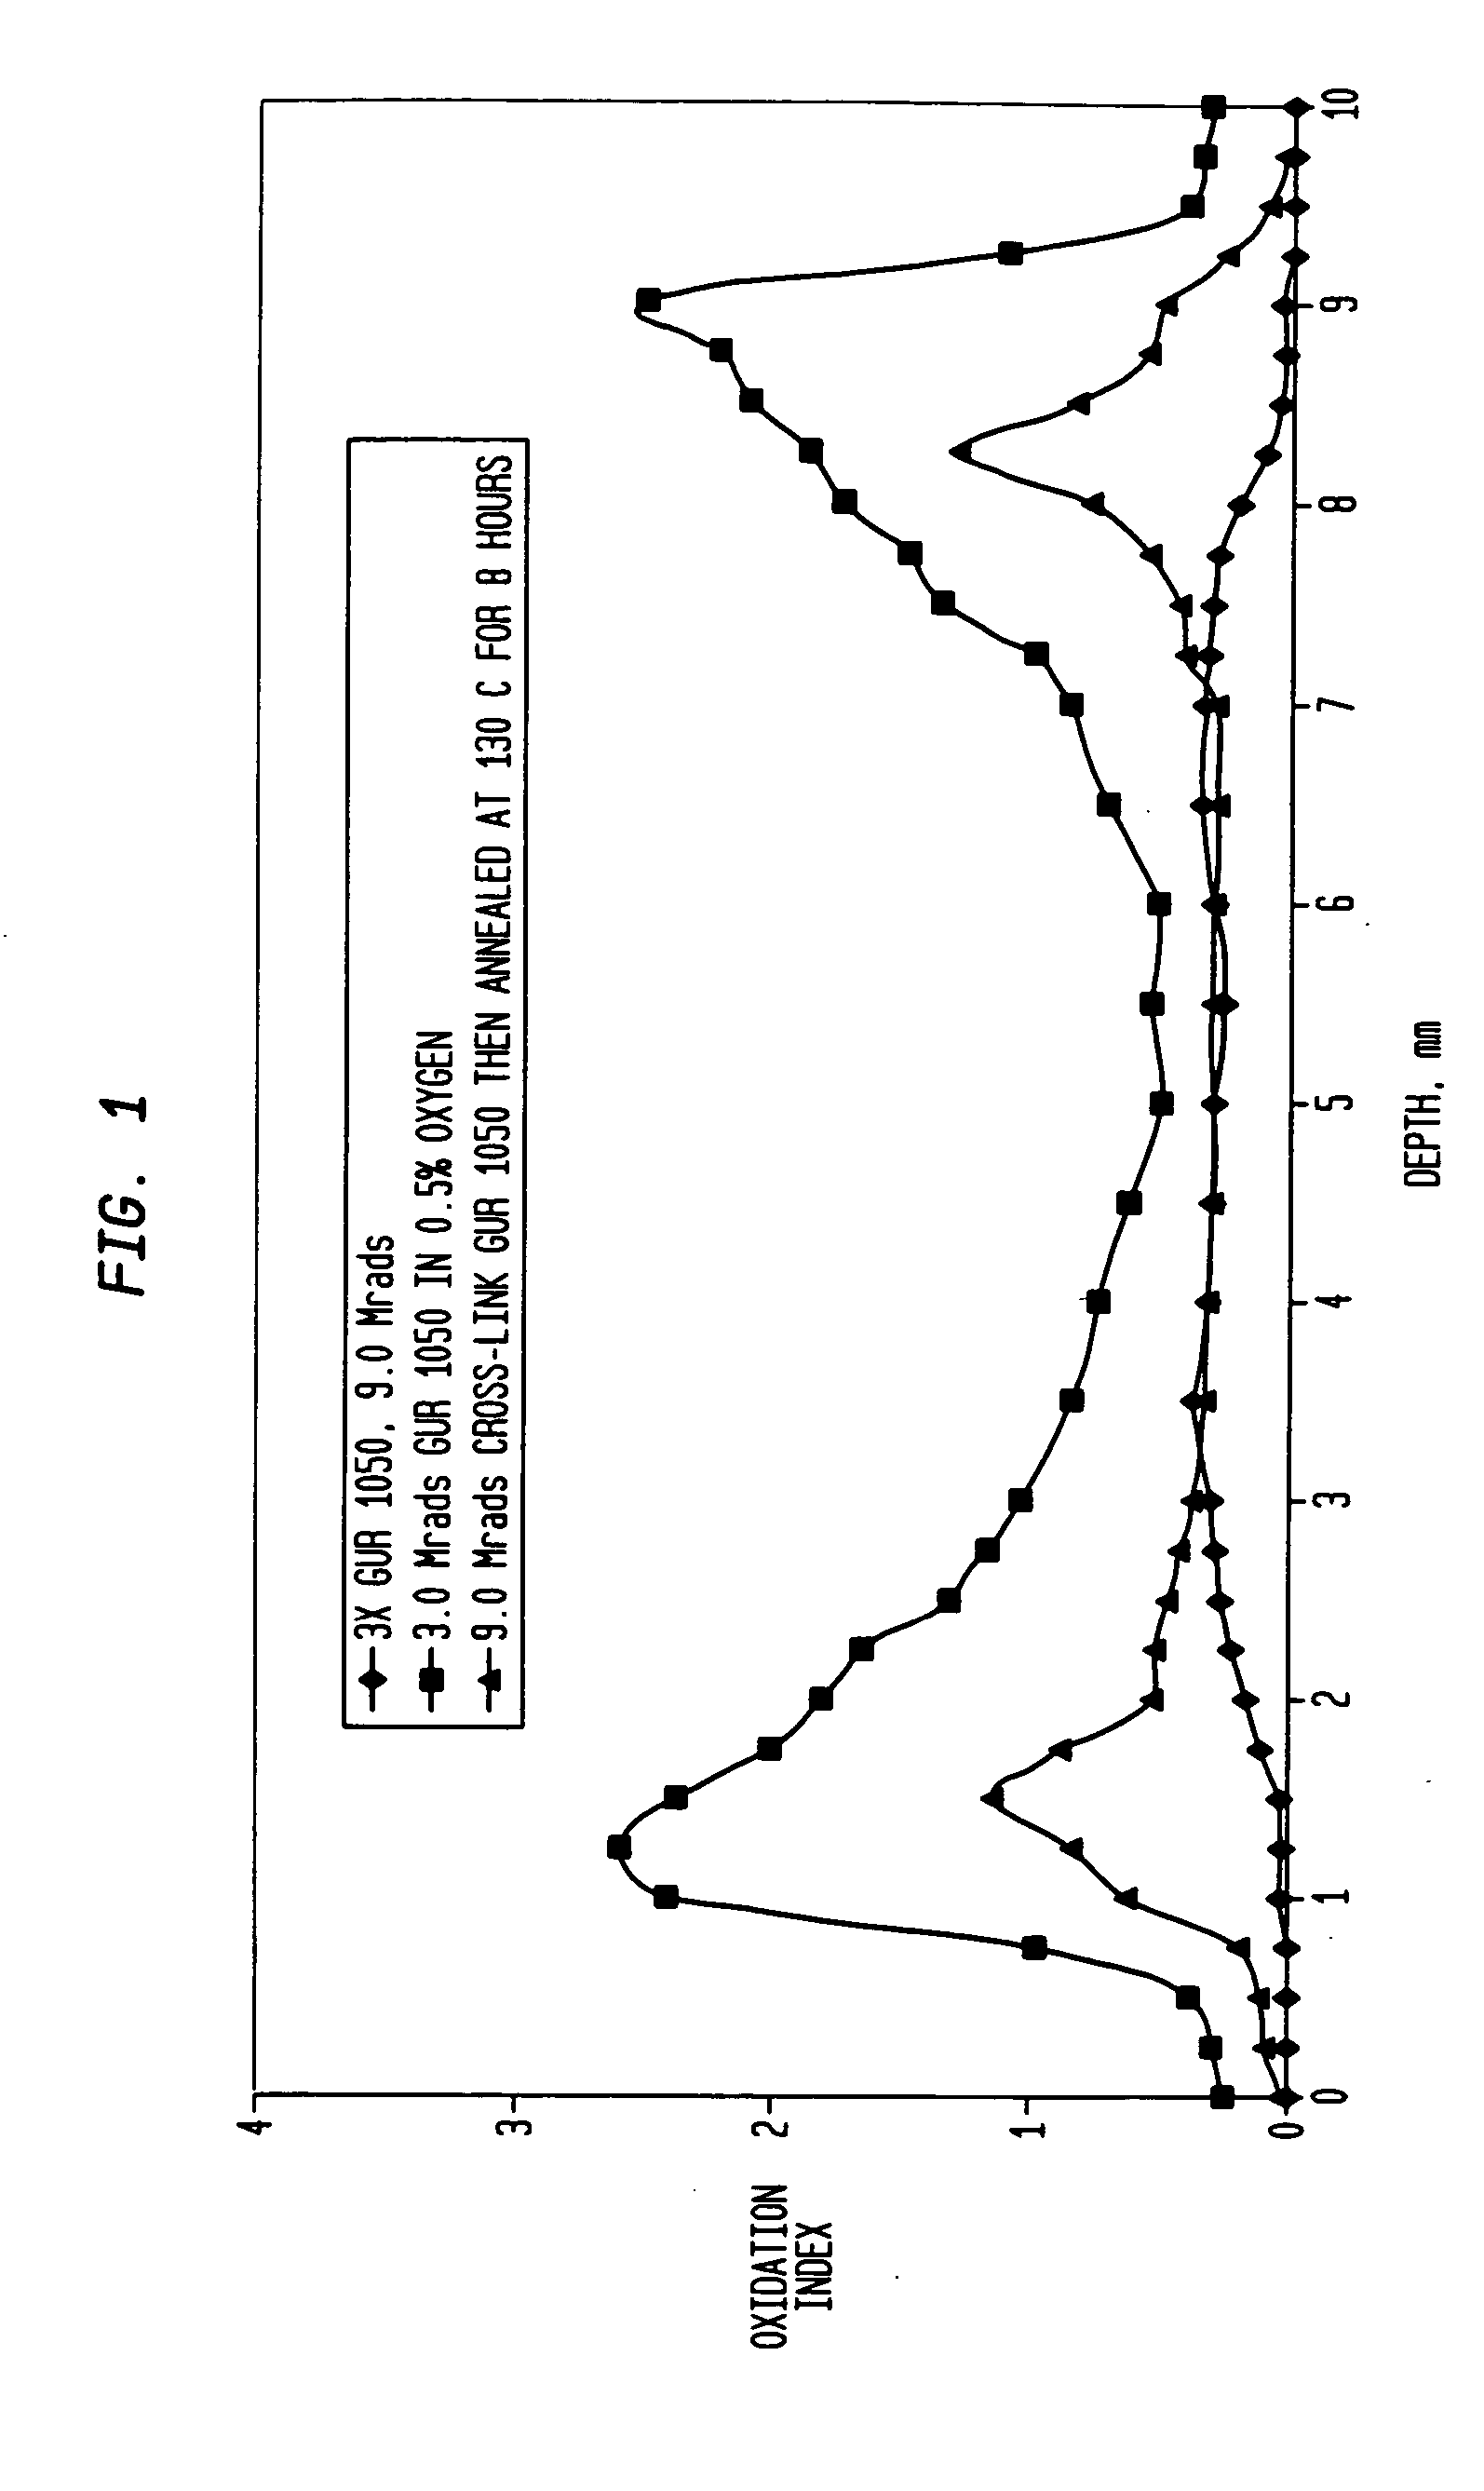 Sequentially cross-linked polyethylene